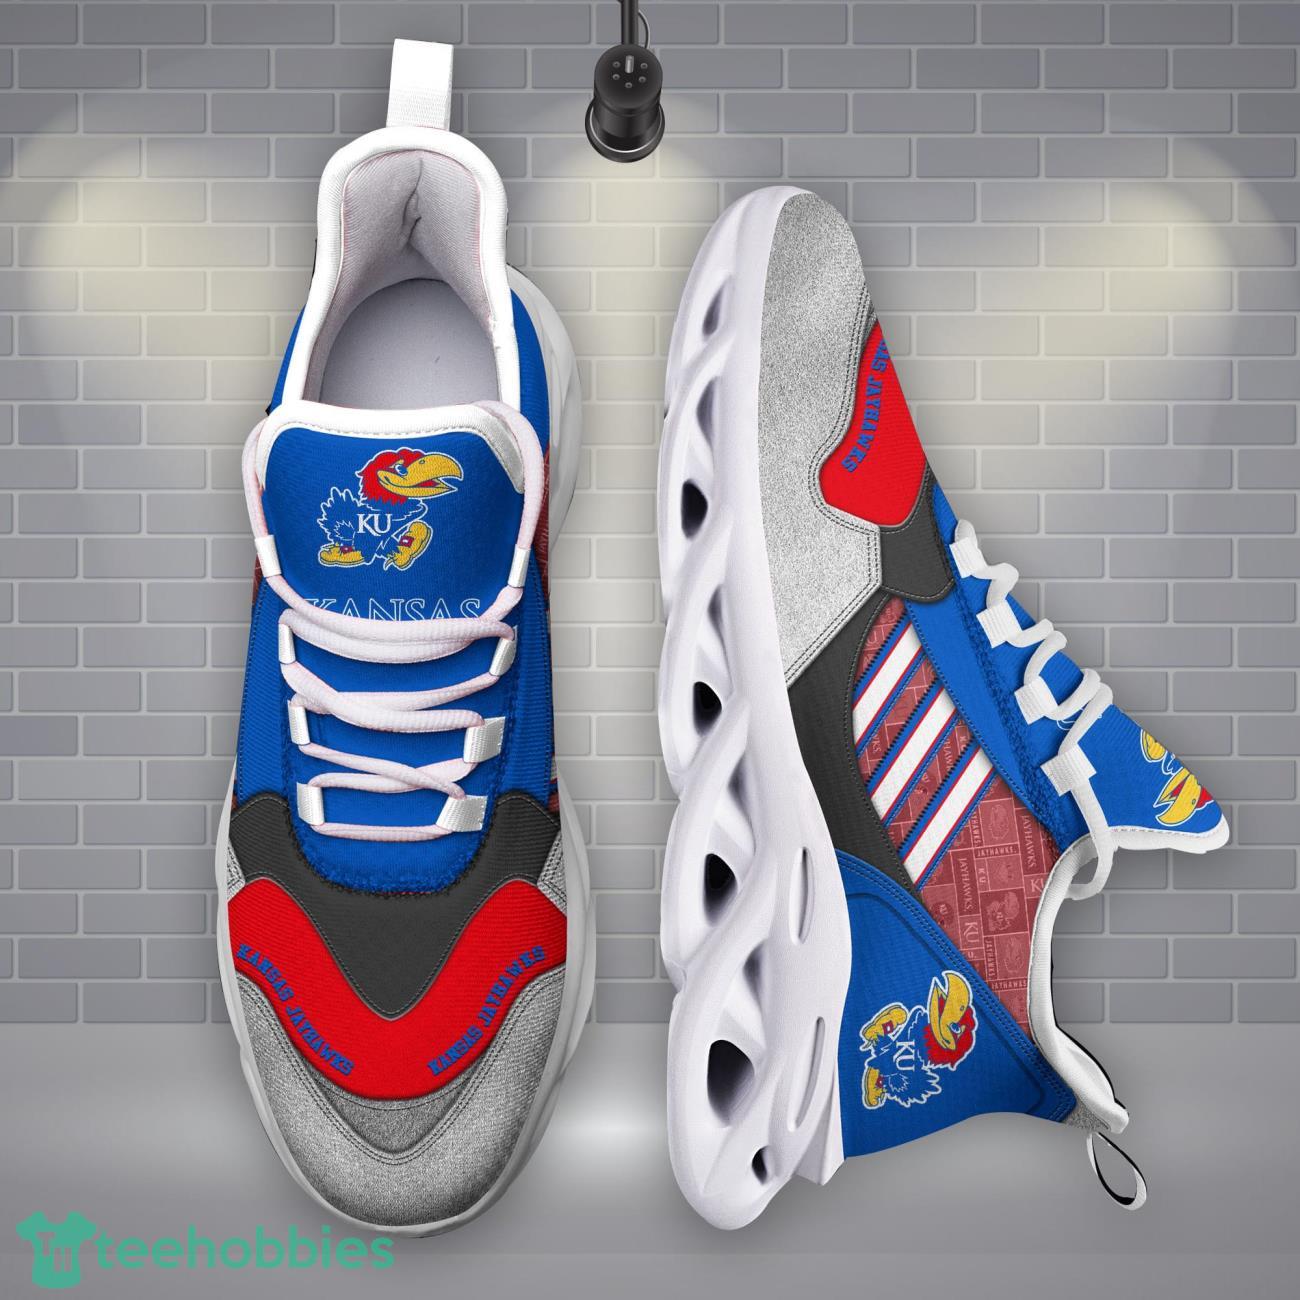 Kansas Jayhawks NCAA2 Logo Sport Team Max Soul Shoes Clunky Running Sneakers Product Photo 1